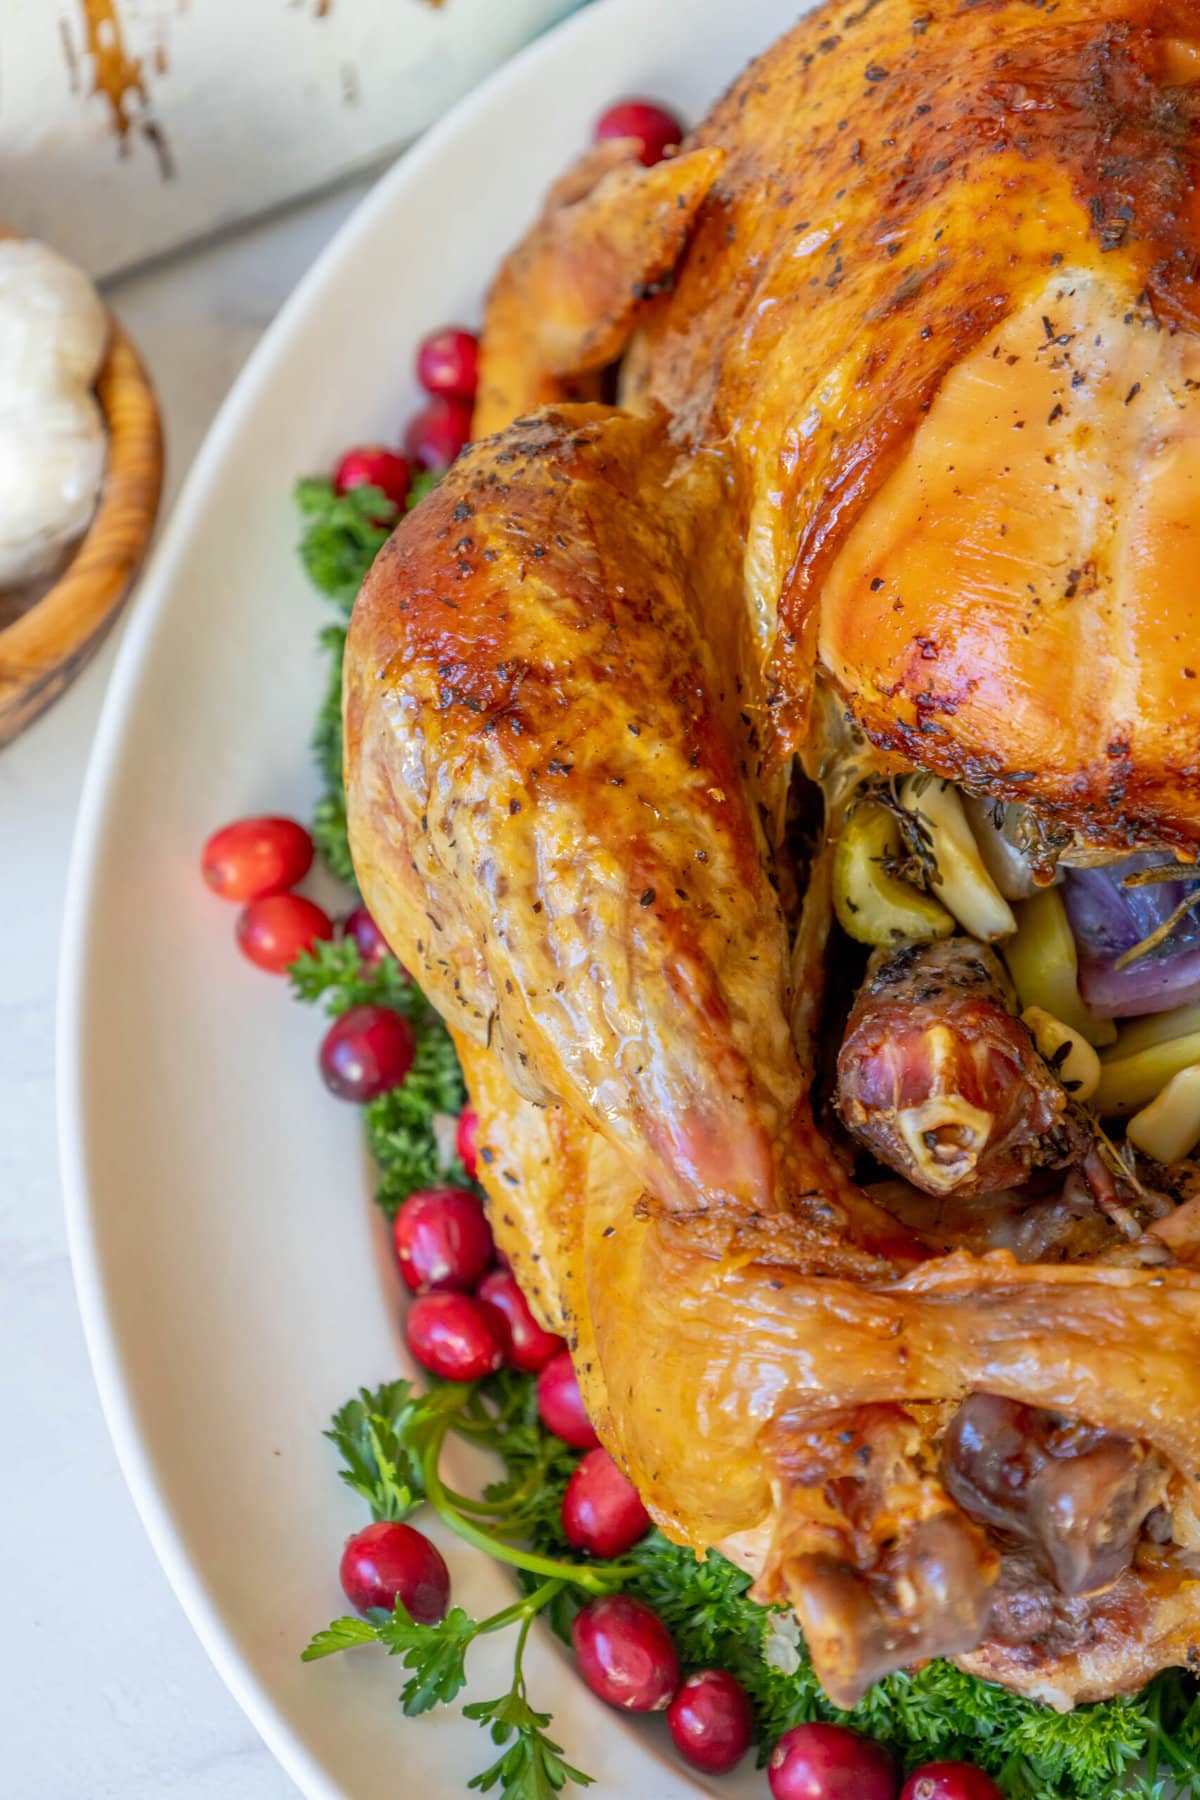 picture of a roasted turkey on a plate with kale and cranberries